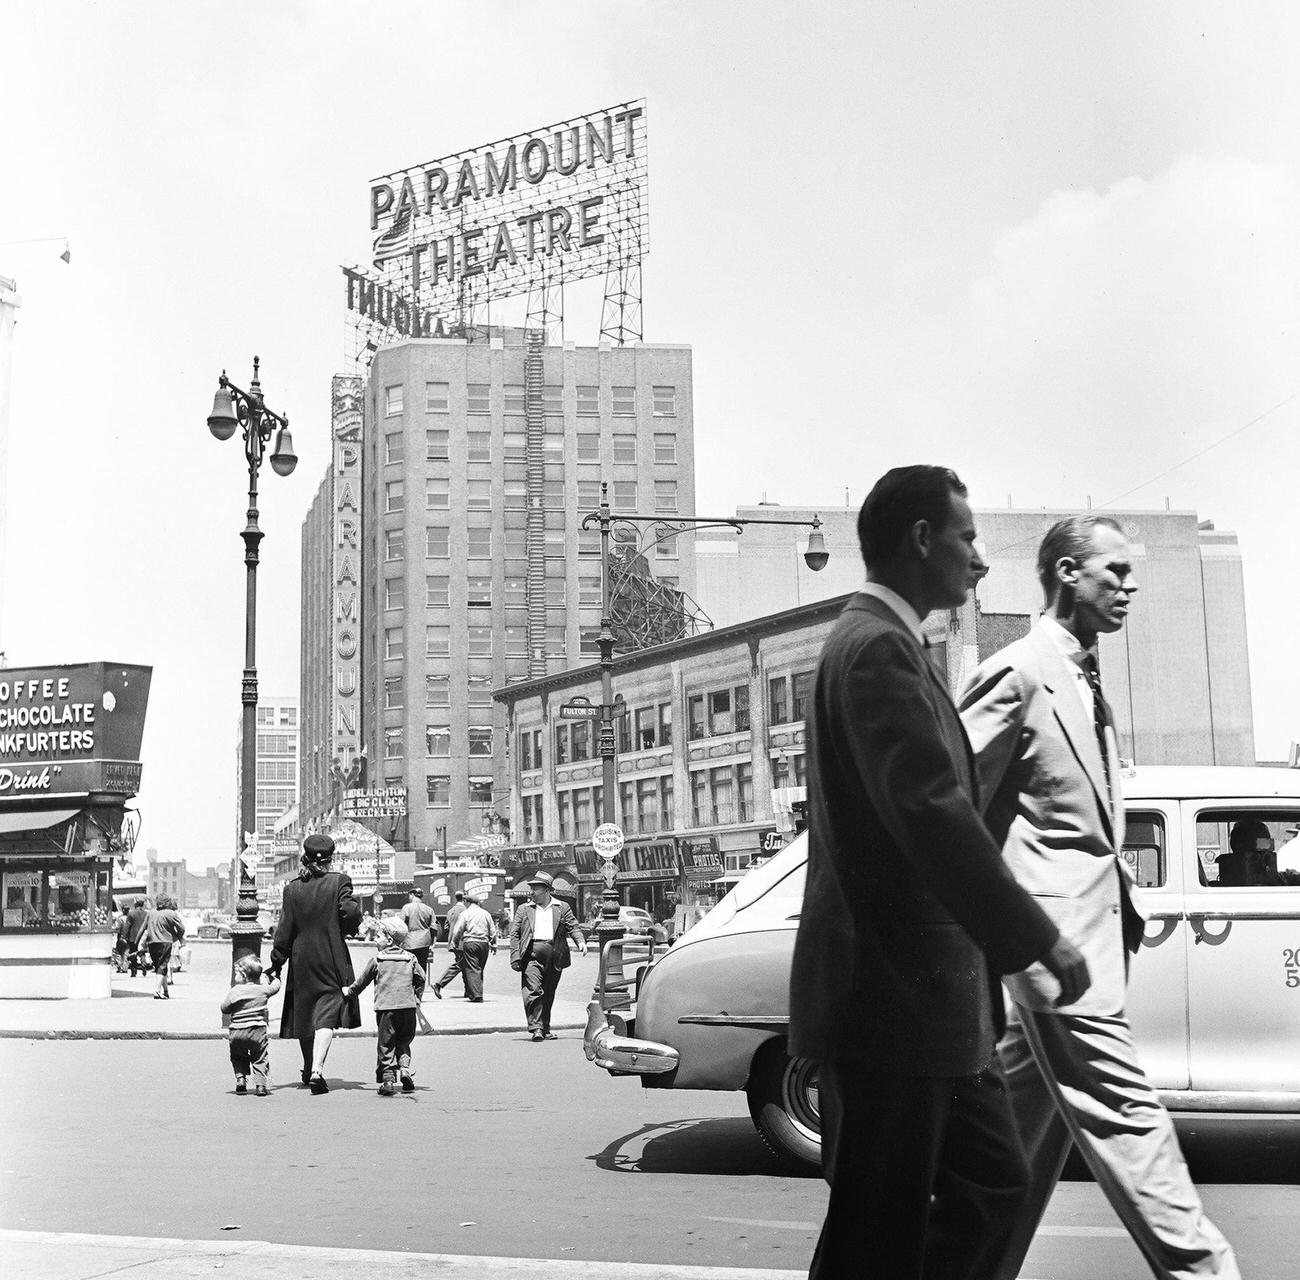 Views, Looking North Across The Intersection Of Fulton Street And Flatbush Avenue, Towards The Paramount Theatre, Brooklyn, 1948